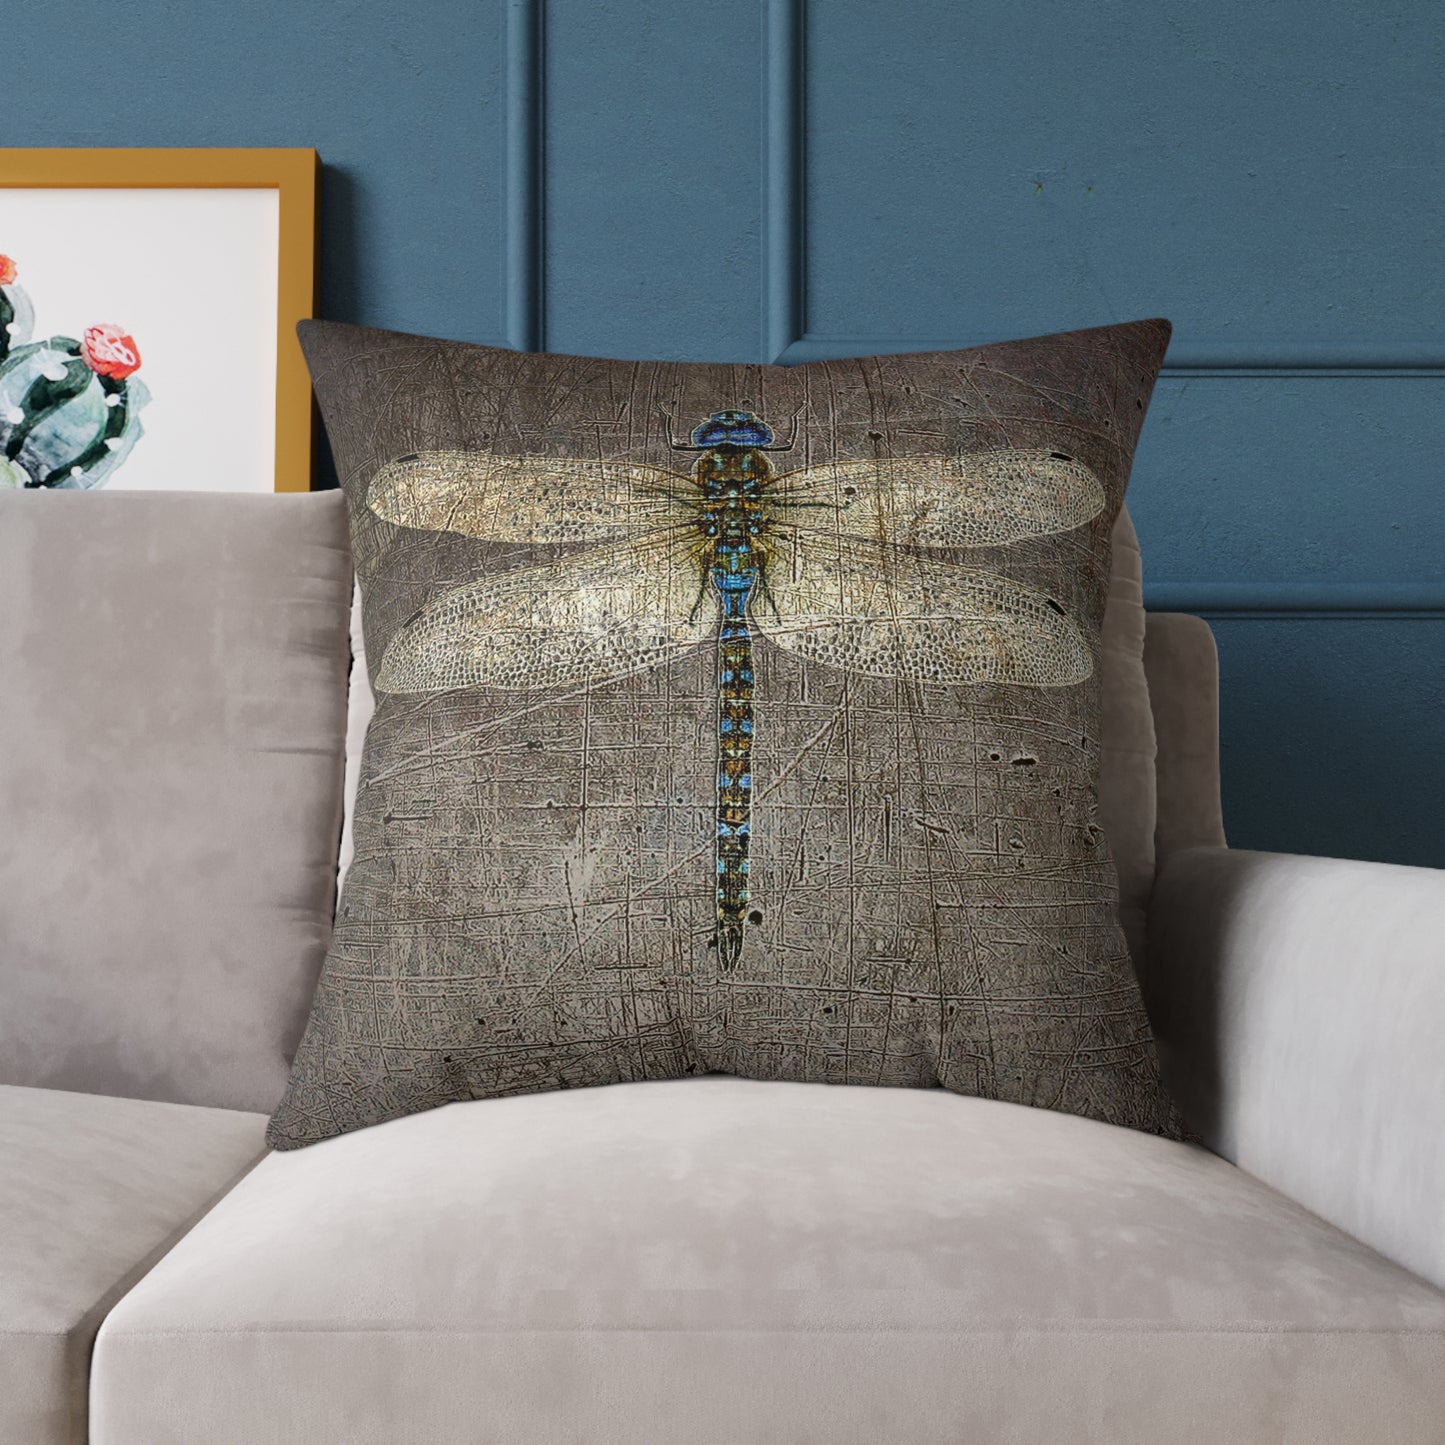 Large Double Sided Throw Pillow Dragonfly on Distressed Grey Stone Print - Dragonfly Themed Home Decor front on sofa